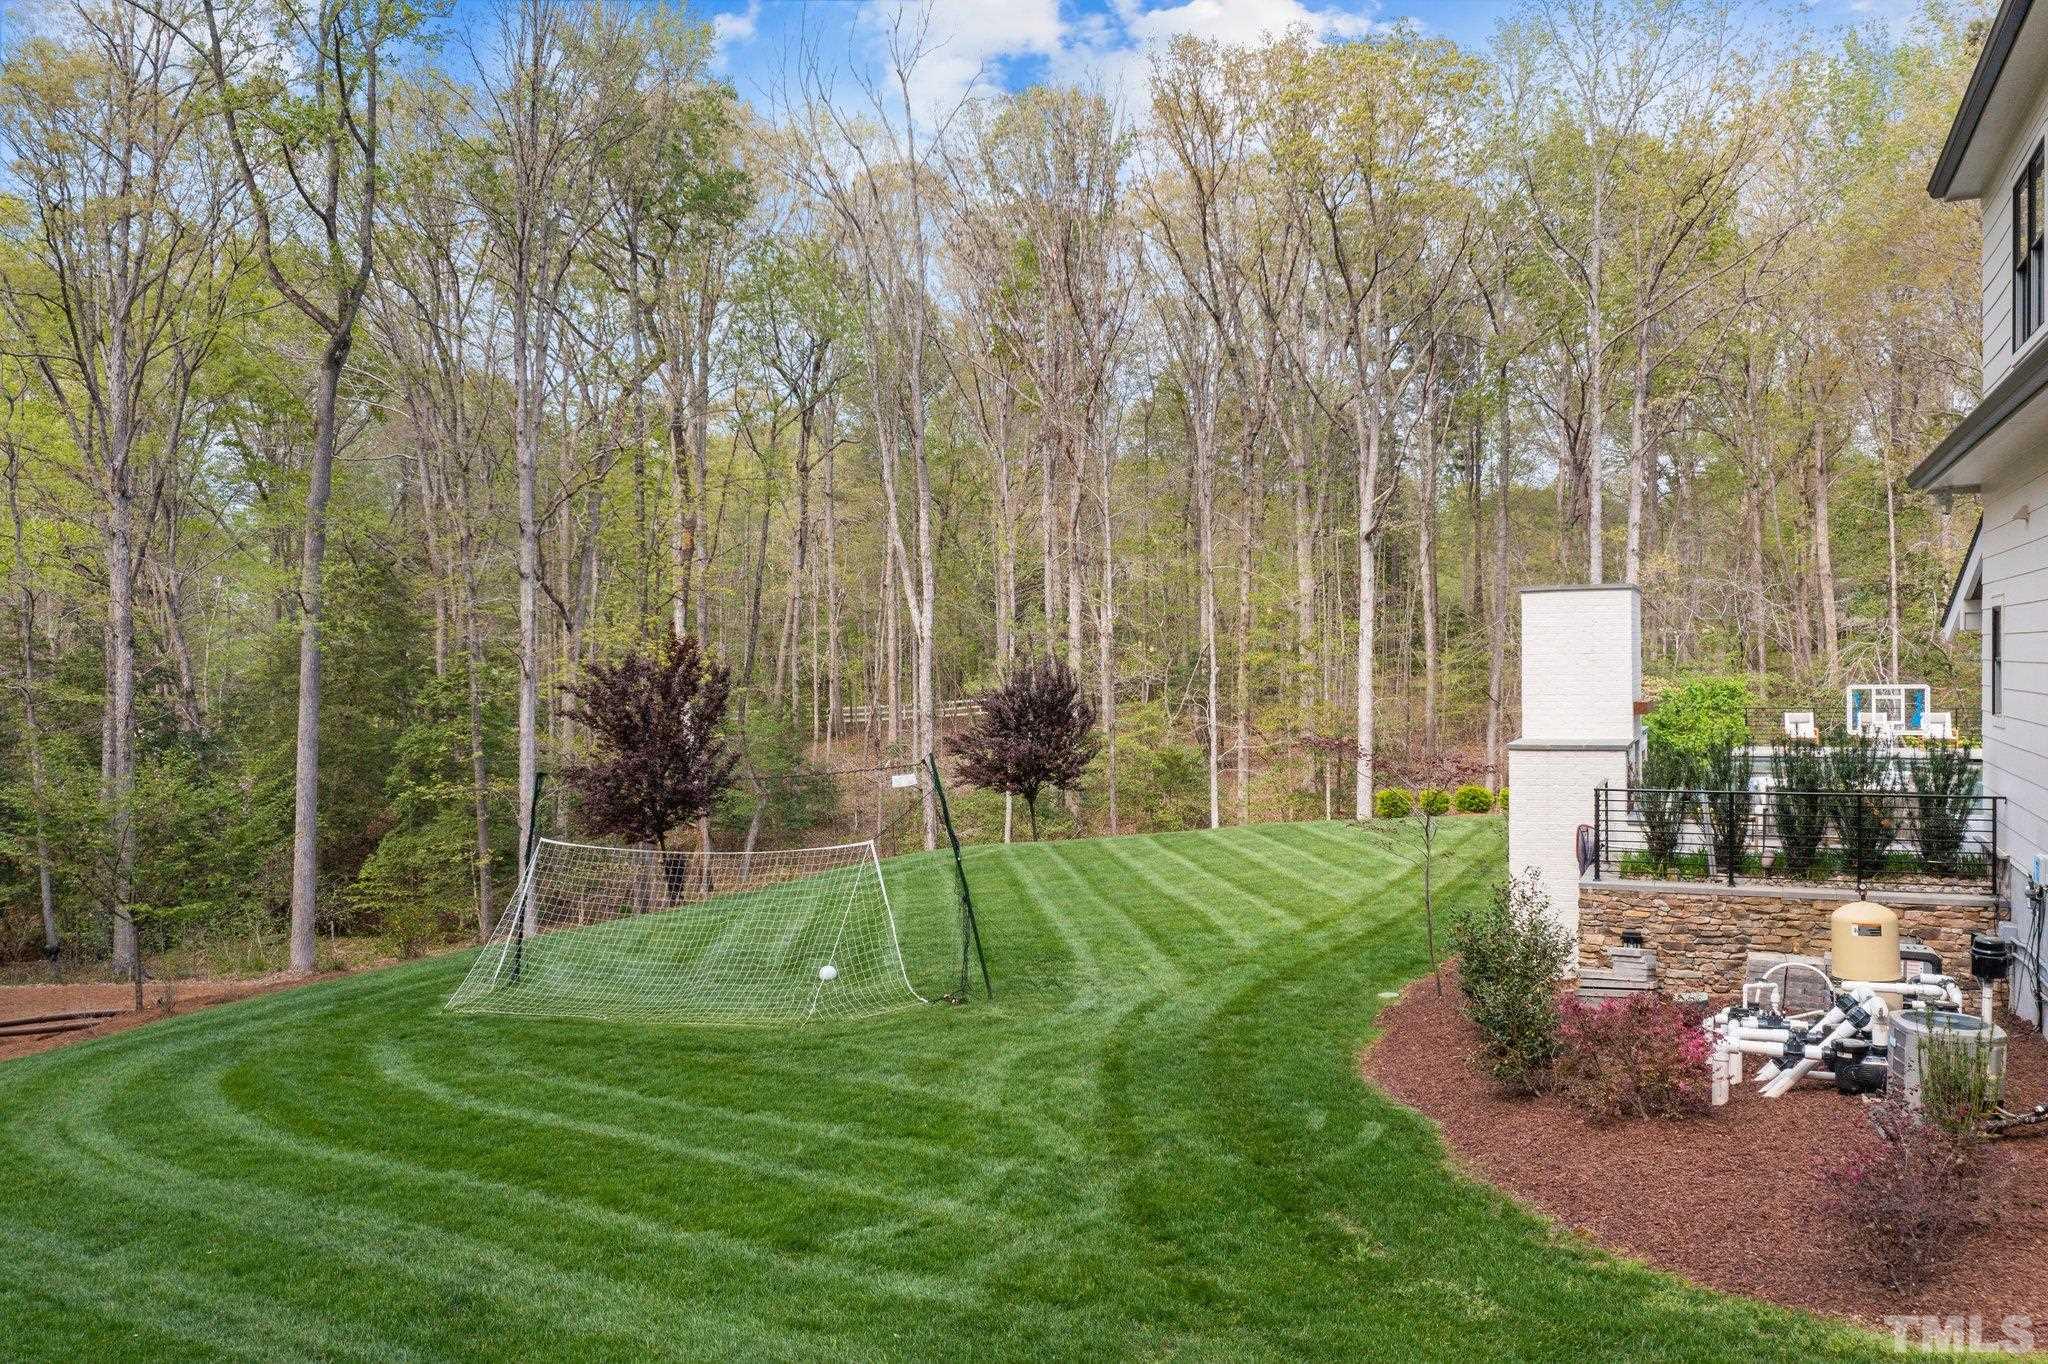 Professionally Landscaped Yard - Lots of Privacy